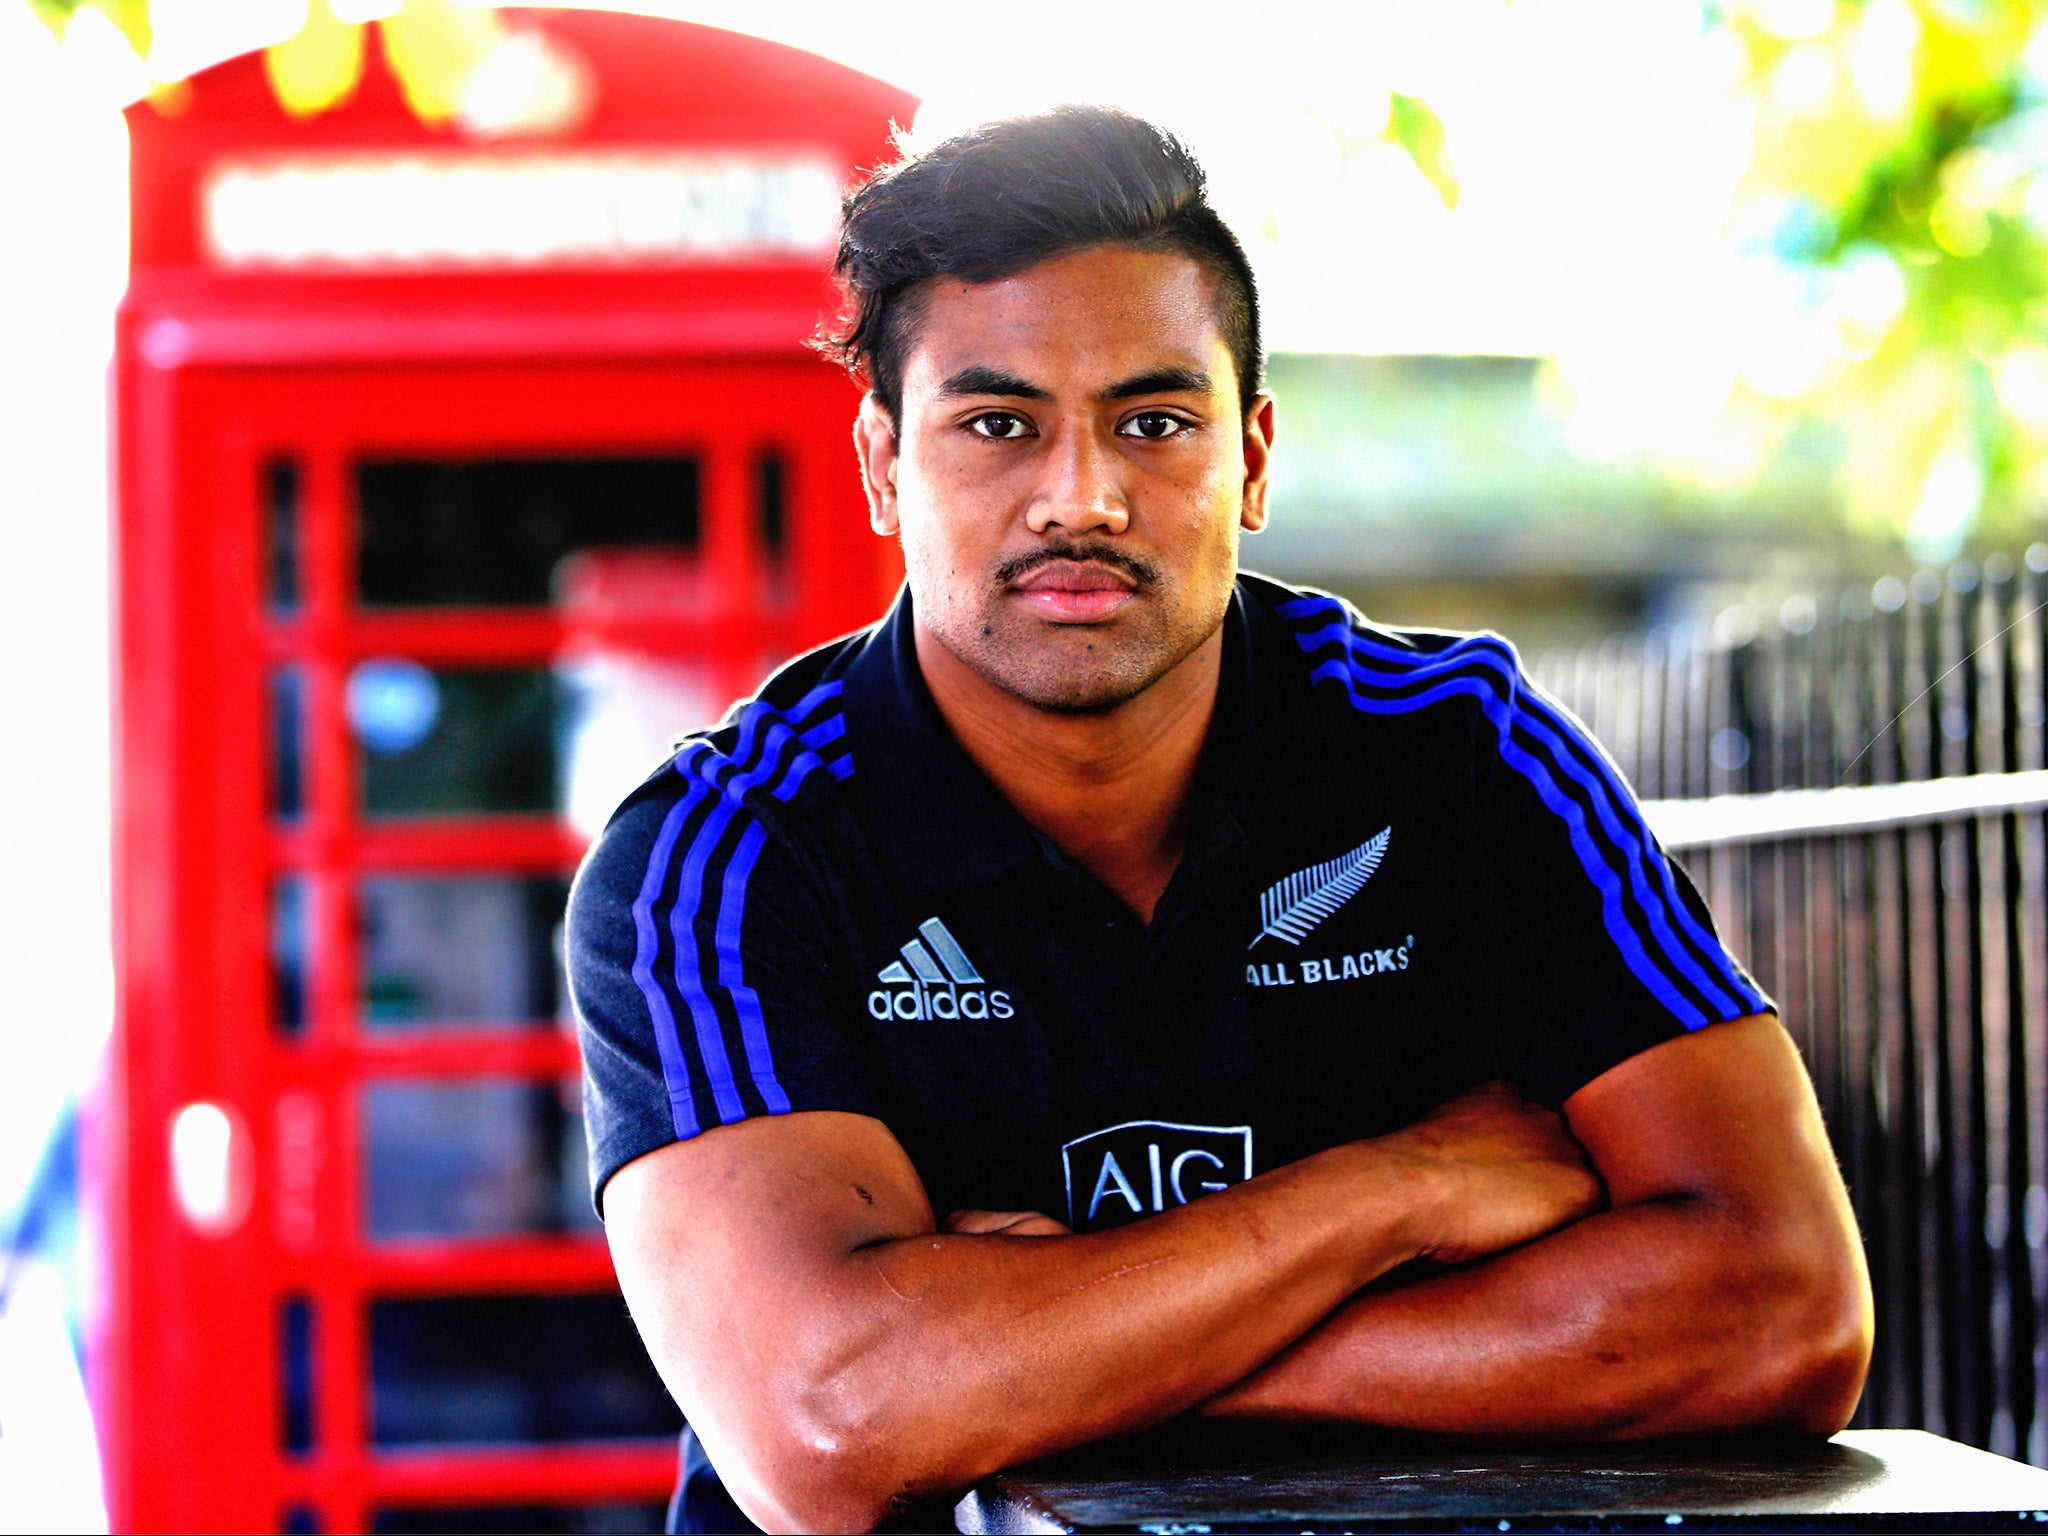 According to the All Blacks coach, Steve Hansen, Julian Savea (pictured in London on Tuesday) is better than Jonah Lomu